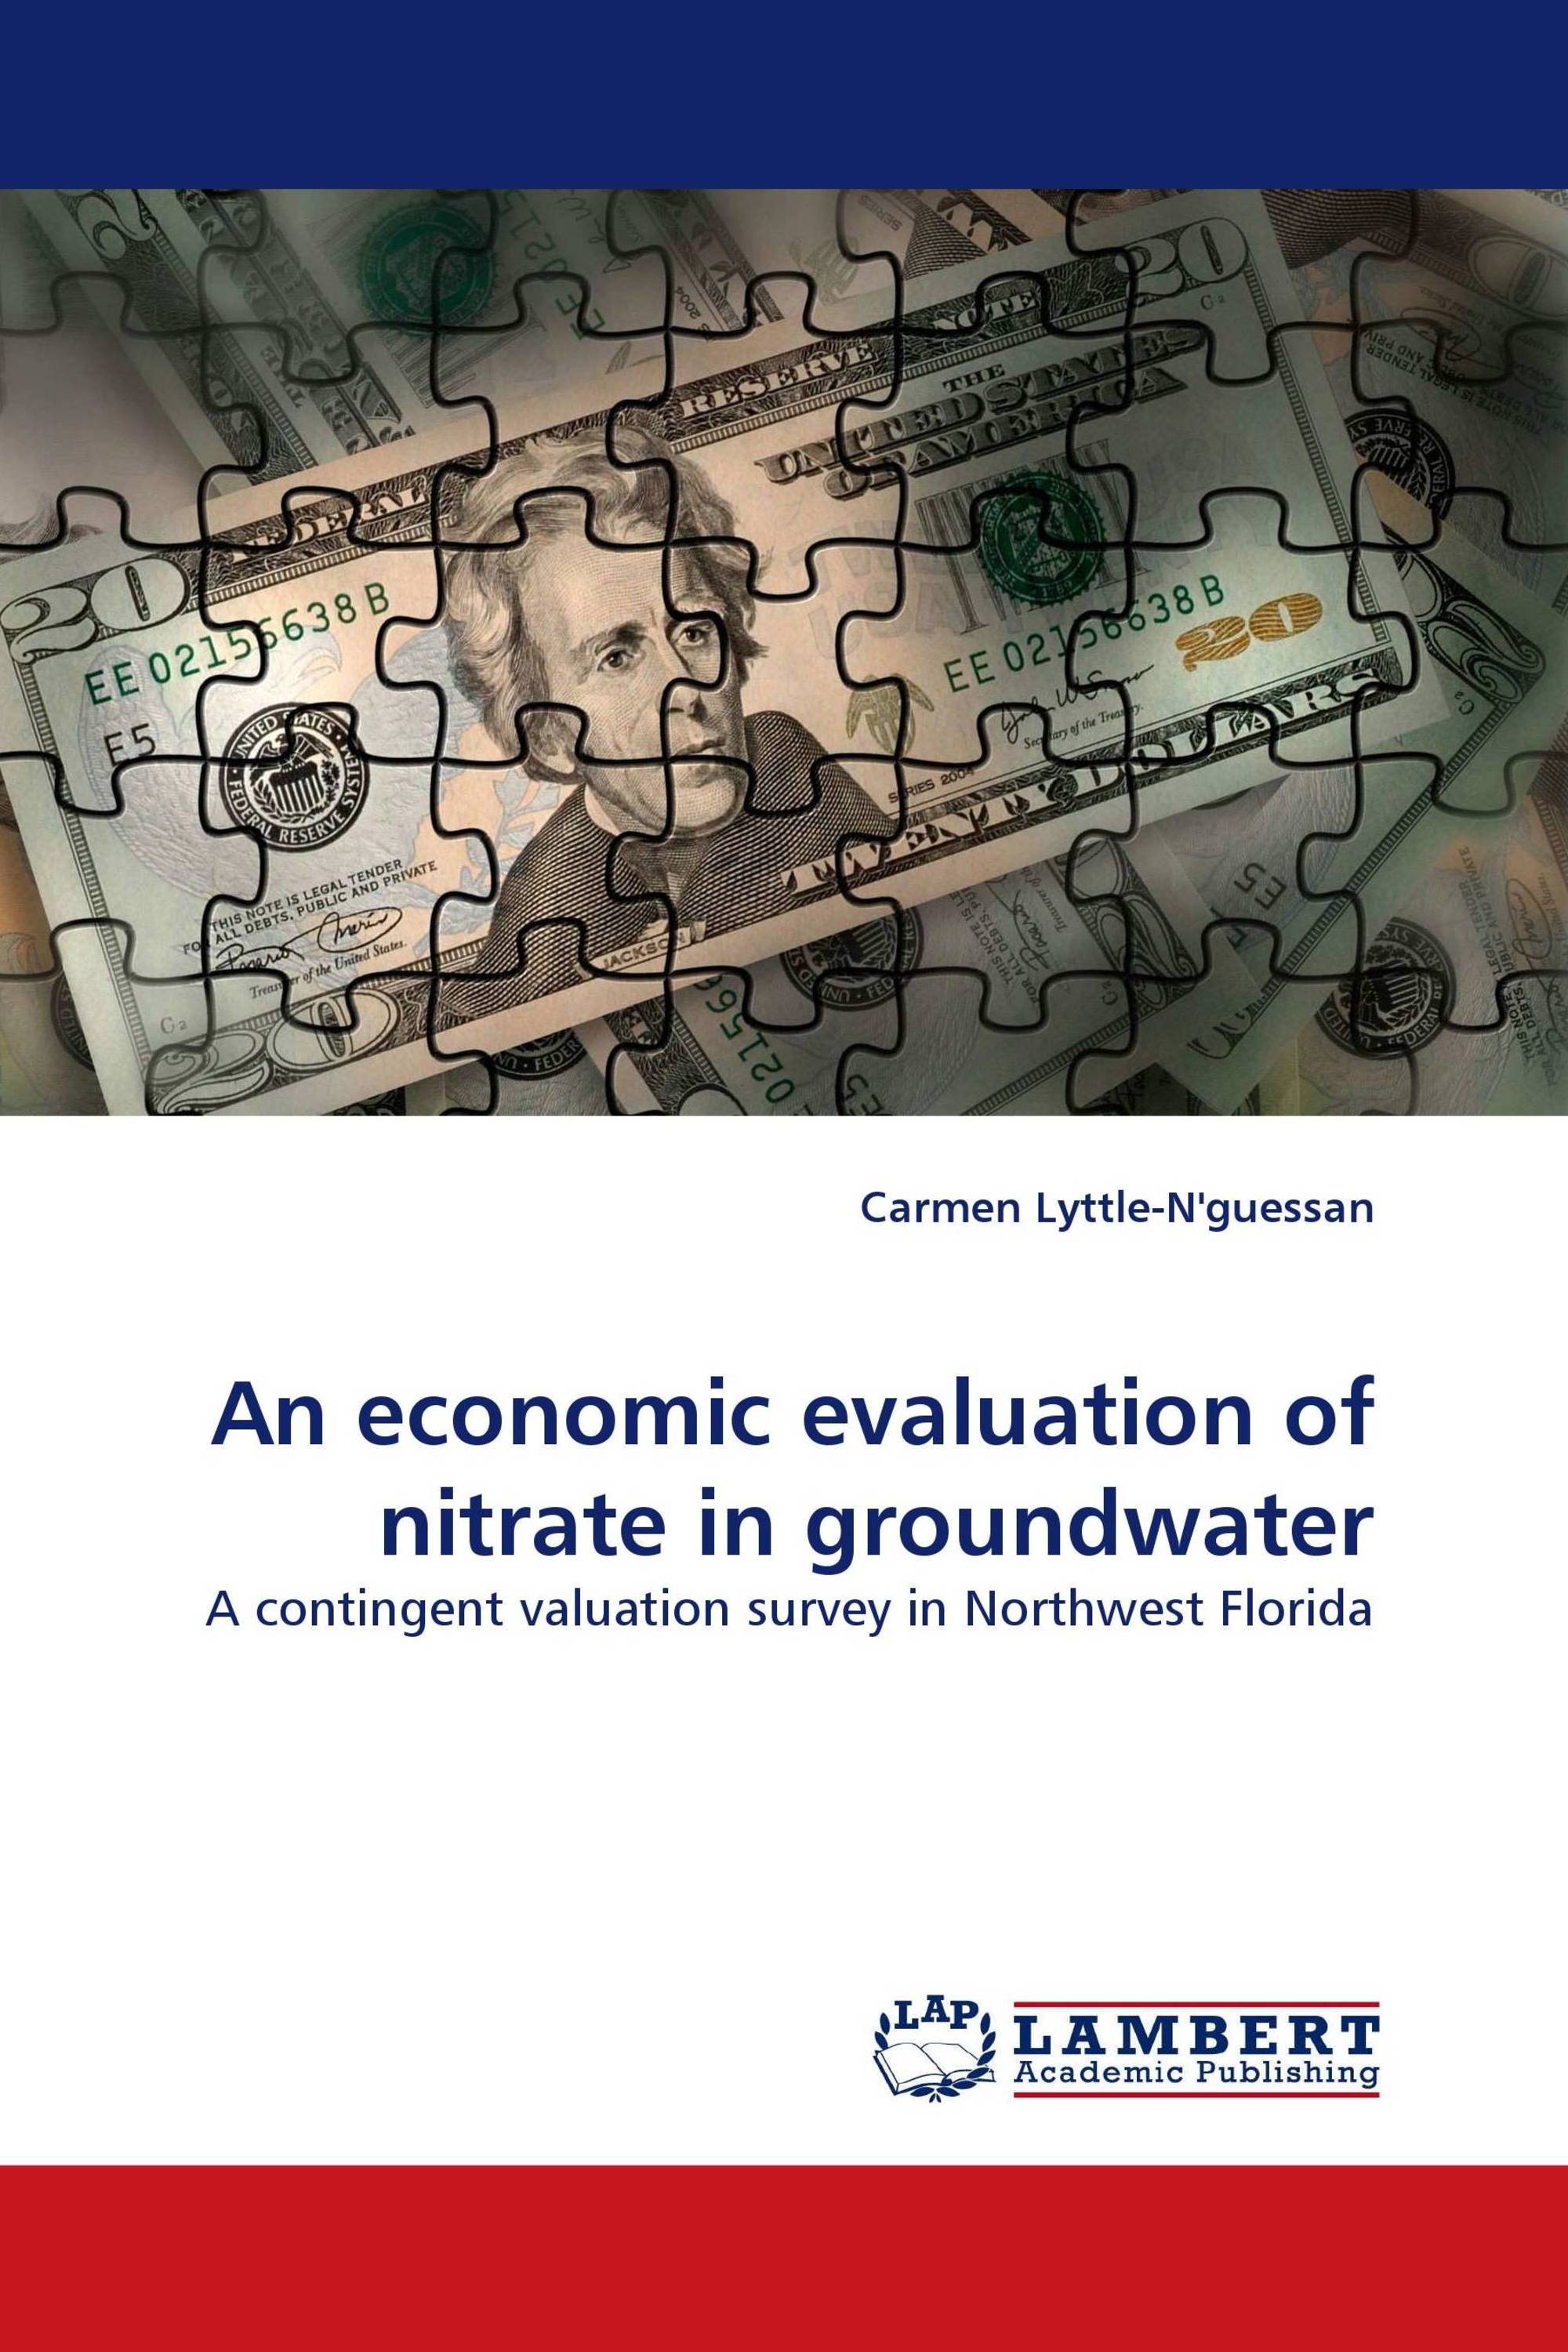 An economic evaluation of nitrate in groundwater